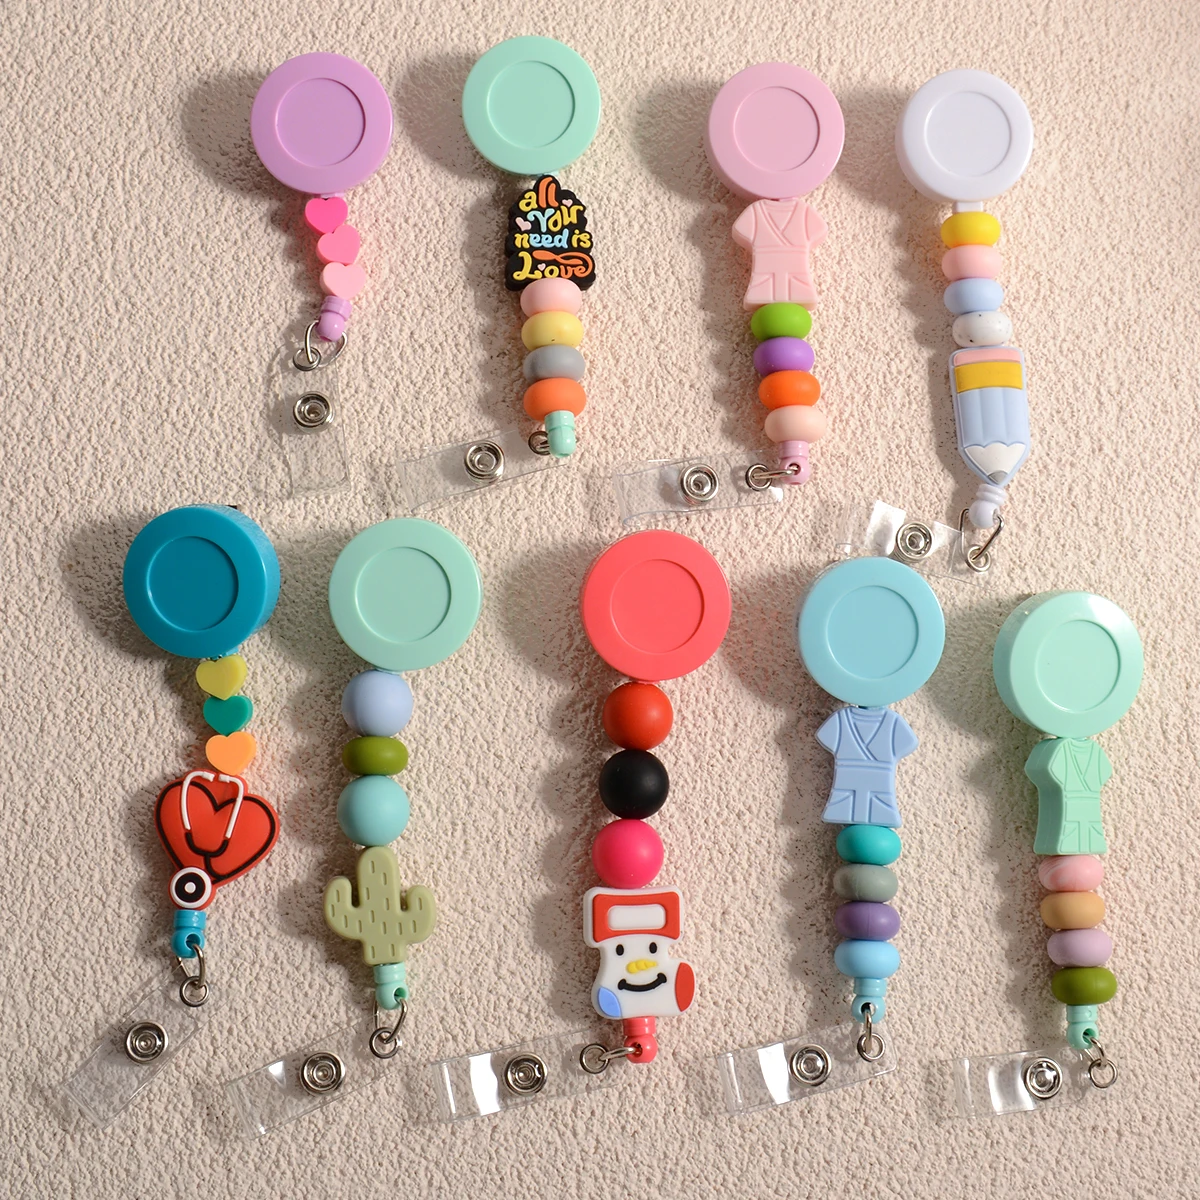 Retractable Silicone Beads Badge Reels BBS Cute Heart Nurse Id Badge Holders with Alligator CliP for Nursing Teachers Office new cute owl flowers nurse doctor hospital badge reel retractable id badge holder with 360 rotating alligator clip name holder